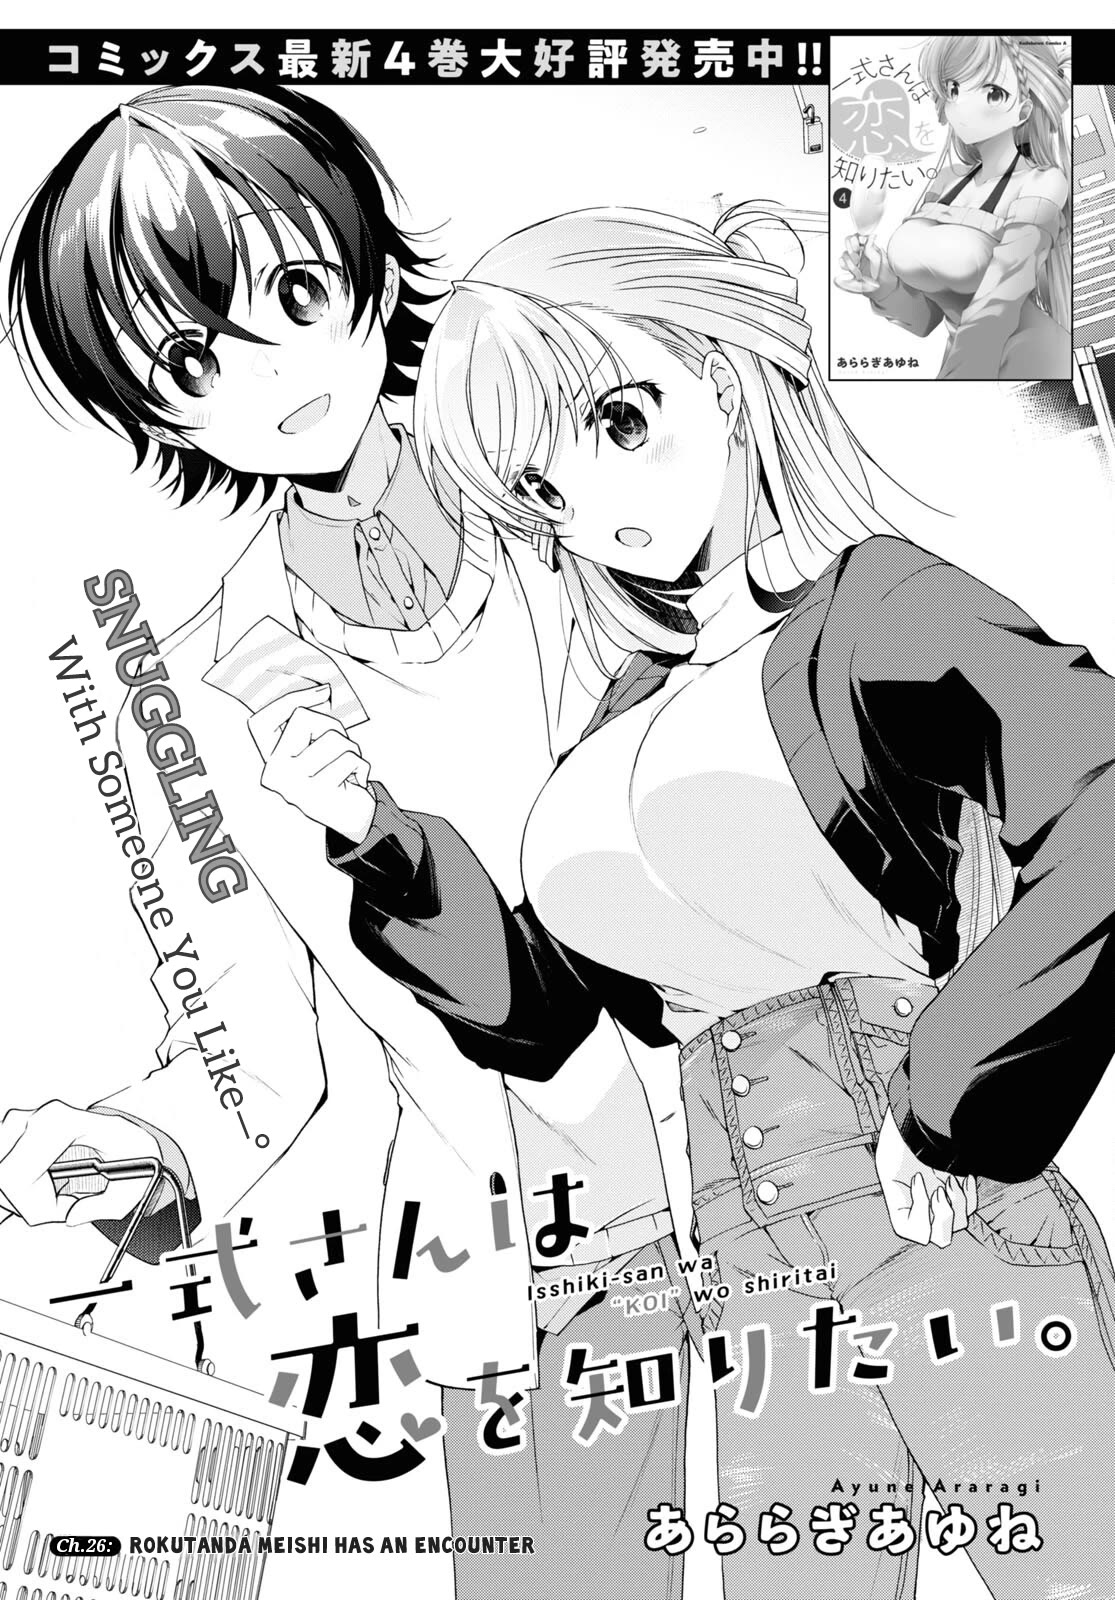 Isshiki-san Wants to Know About Love. - chapter 26 - #2